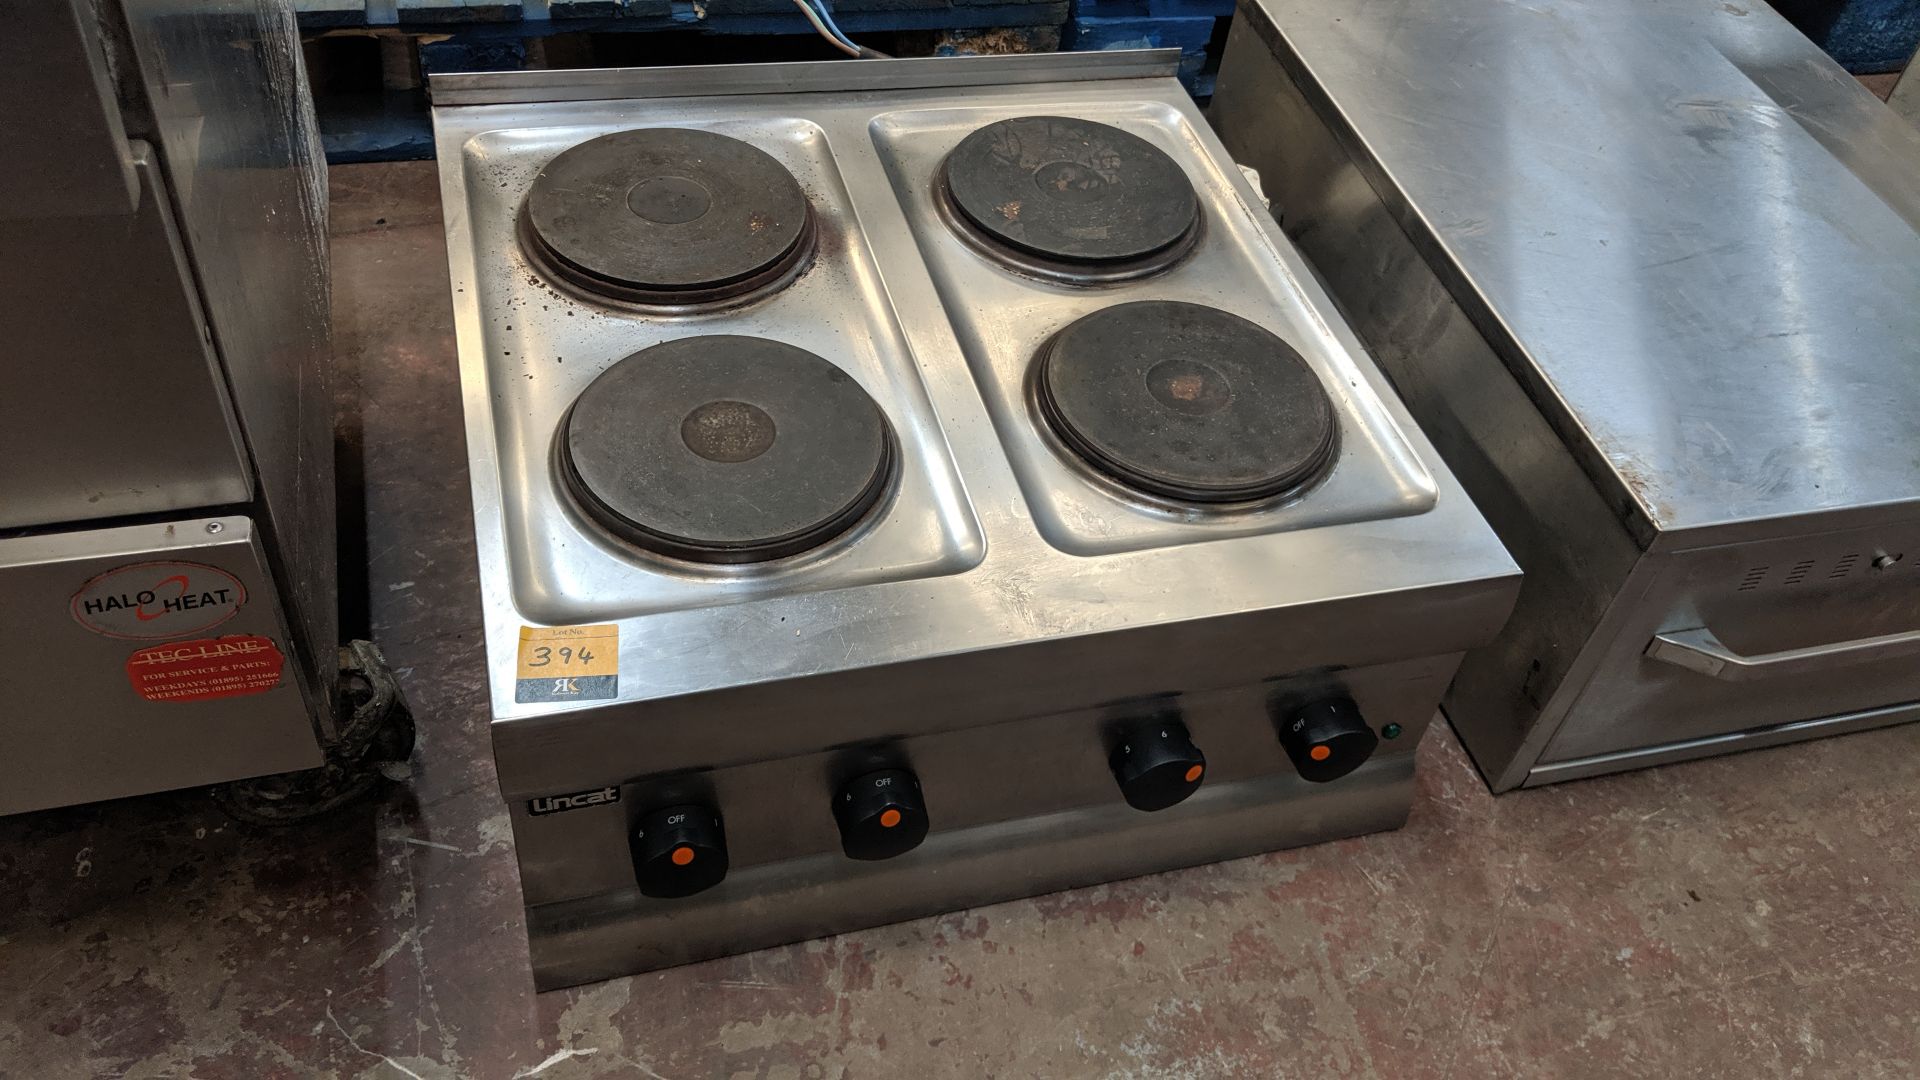 Lincat stainless steel benchtop 4-ring electric hob IMPORTANT: Please remember goods successfully